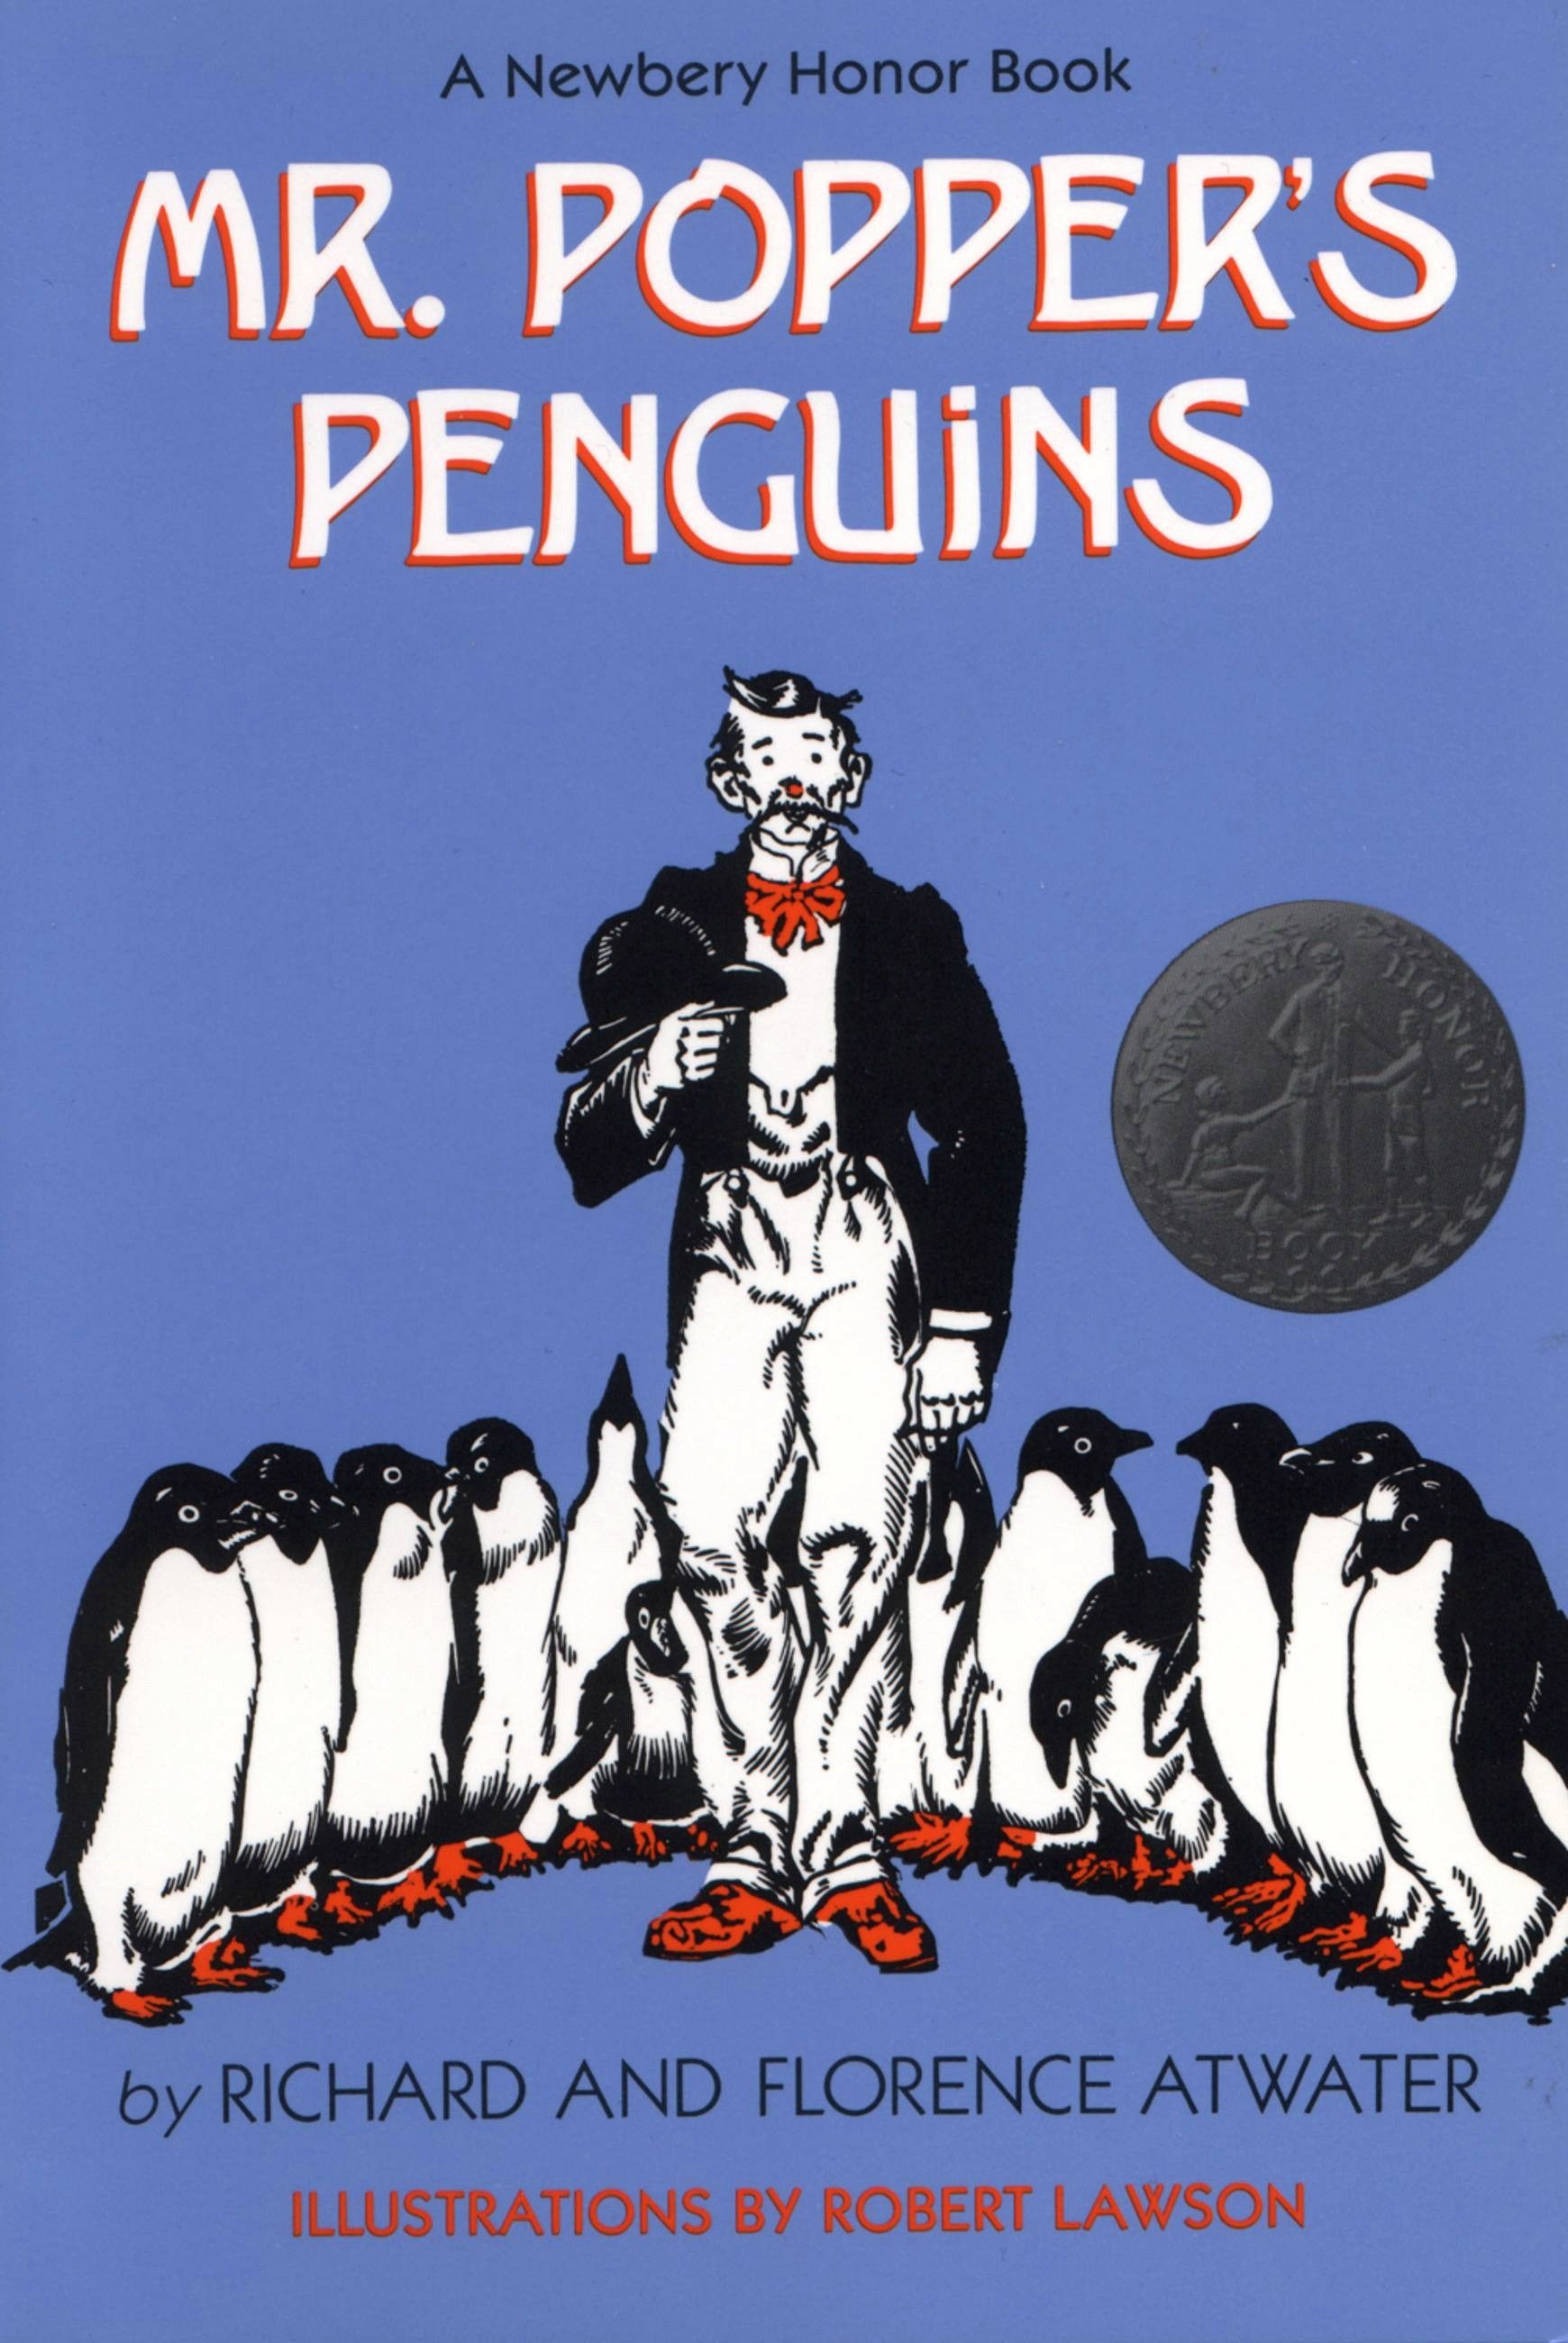 Mr. Popper's Penguins by Richard Atwater. Little, Brown Books